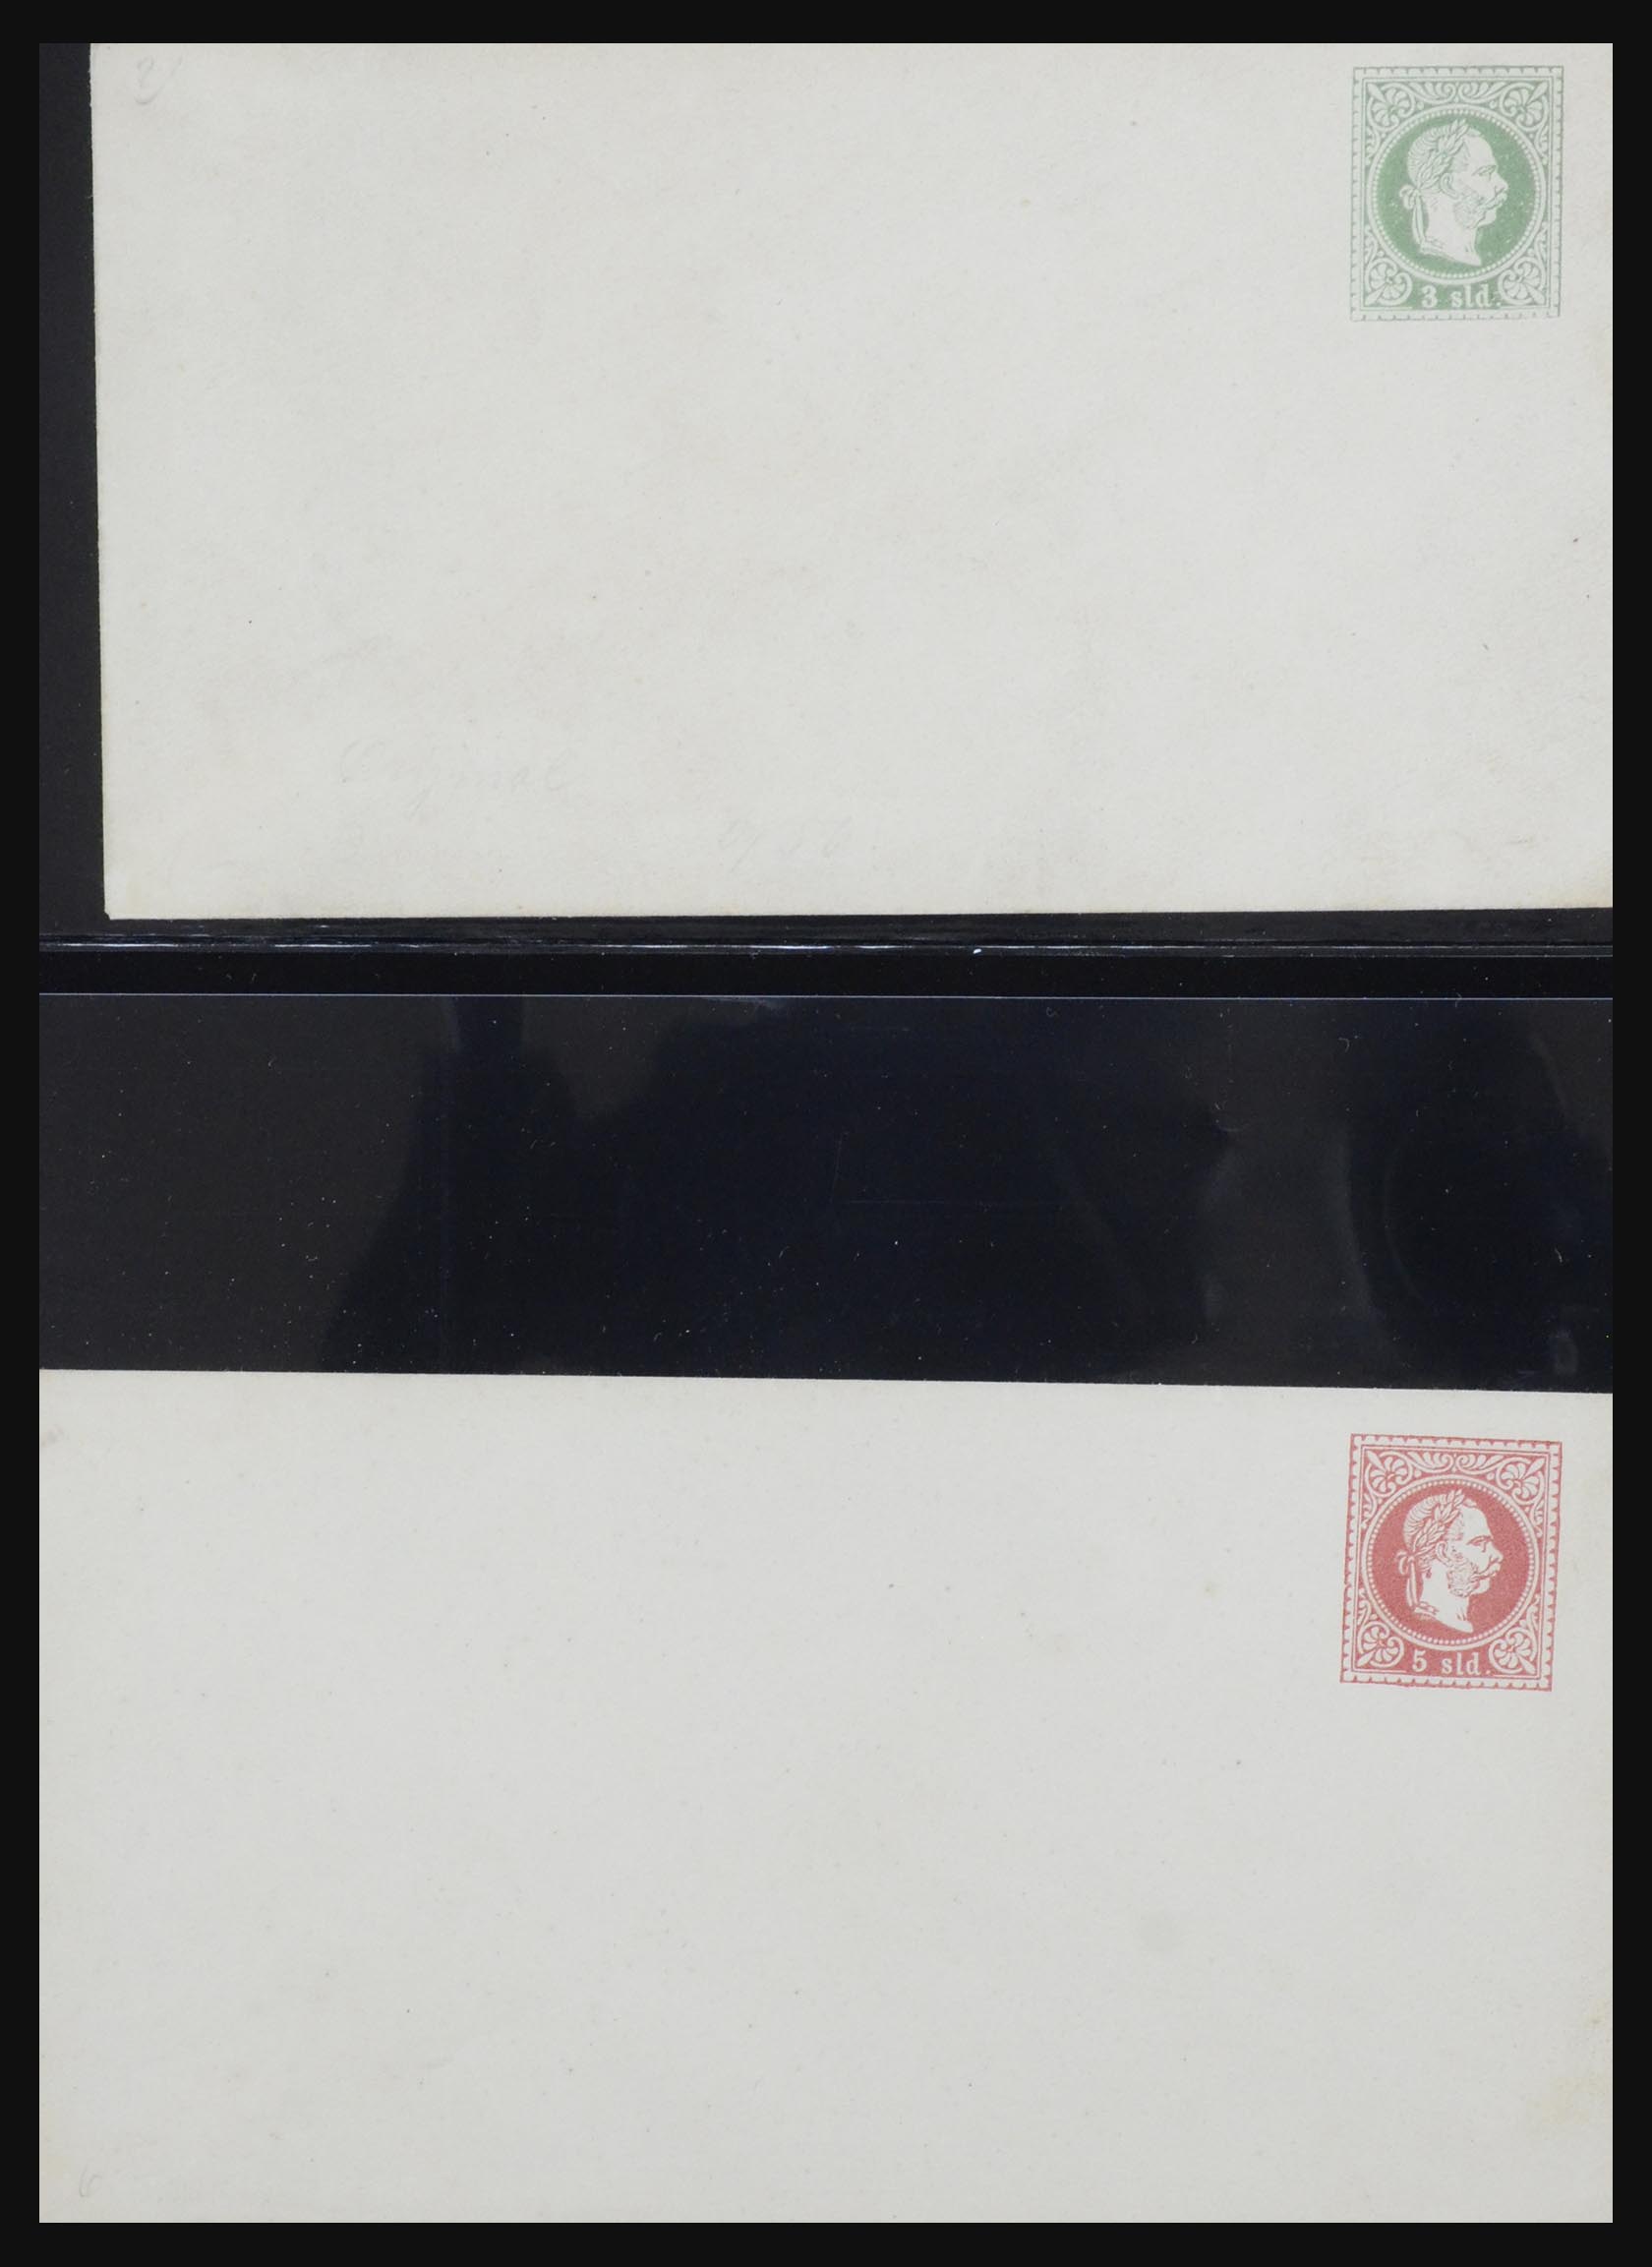 32254 0025 - 32254 Austria covers from 1800.